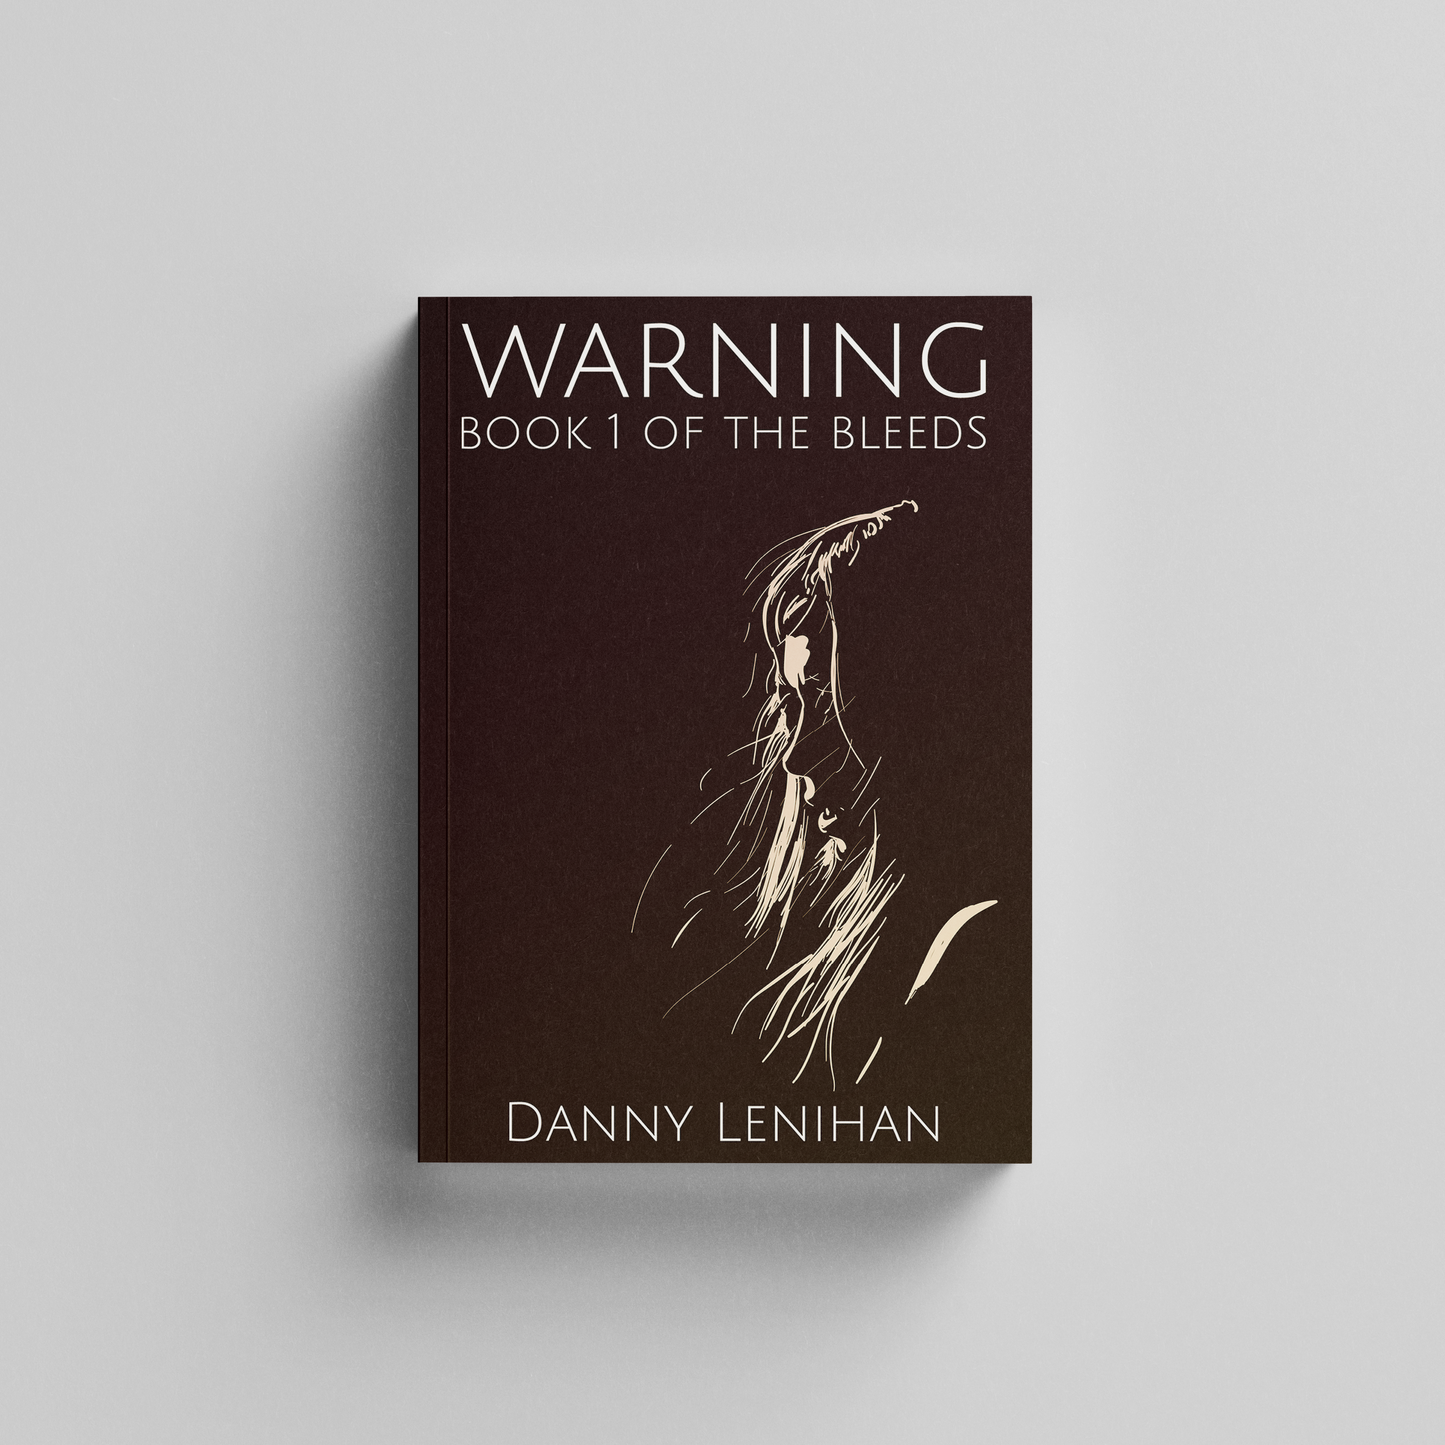 The Bleeds: Complete collection of dystopian shorts - eBook Edition